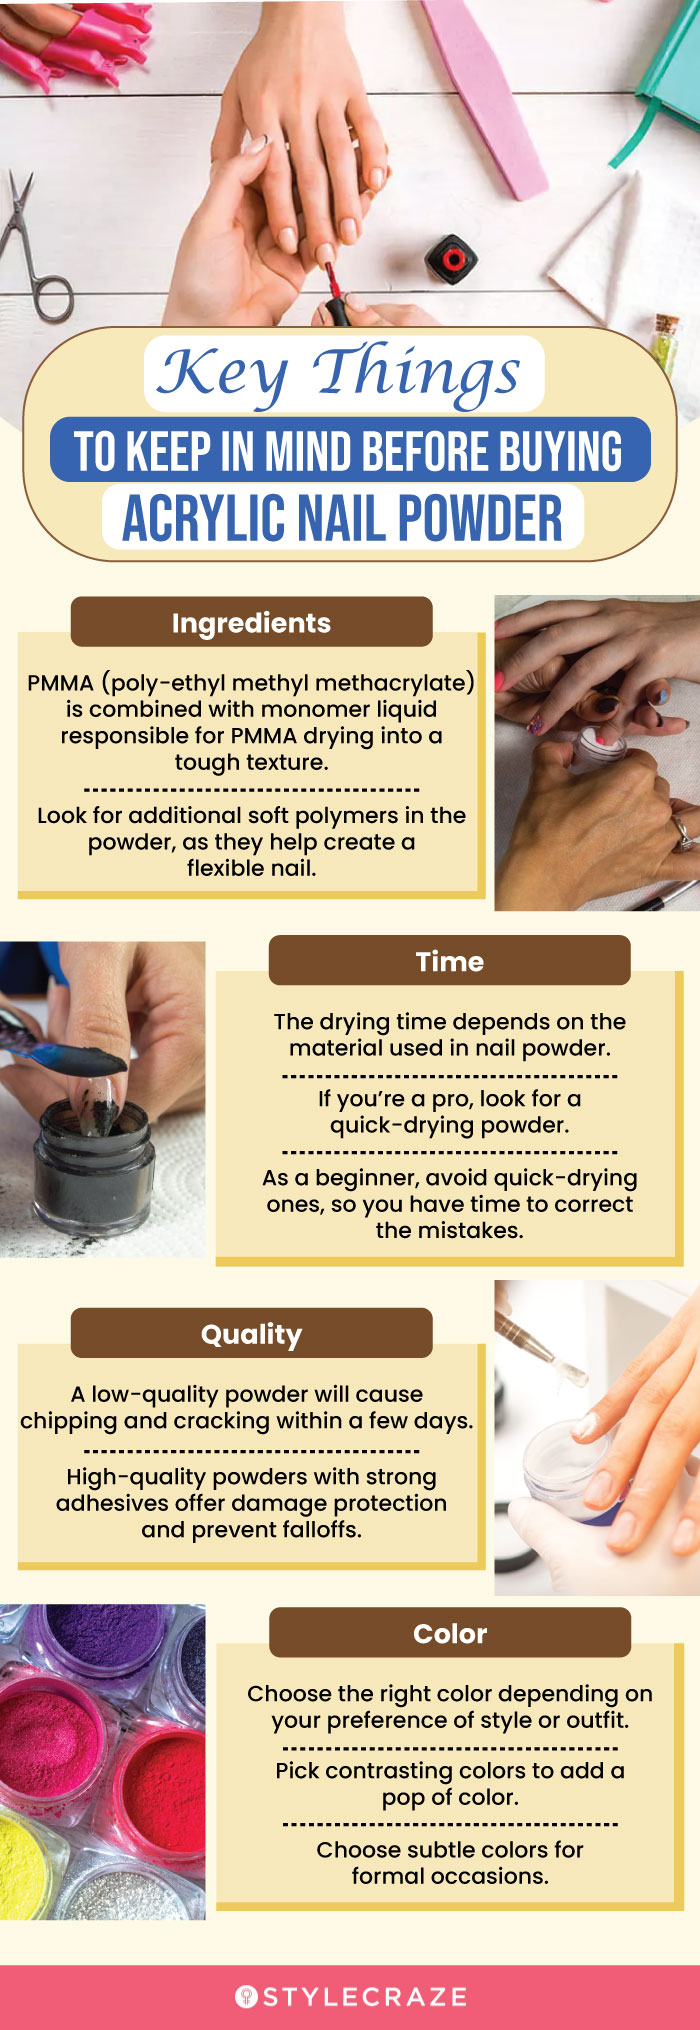 Key Things To Keep In Mind Before Buying Acrylic Nail Powder (infographic)